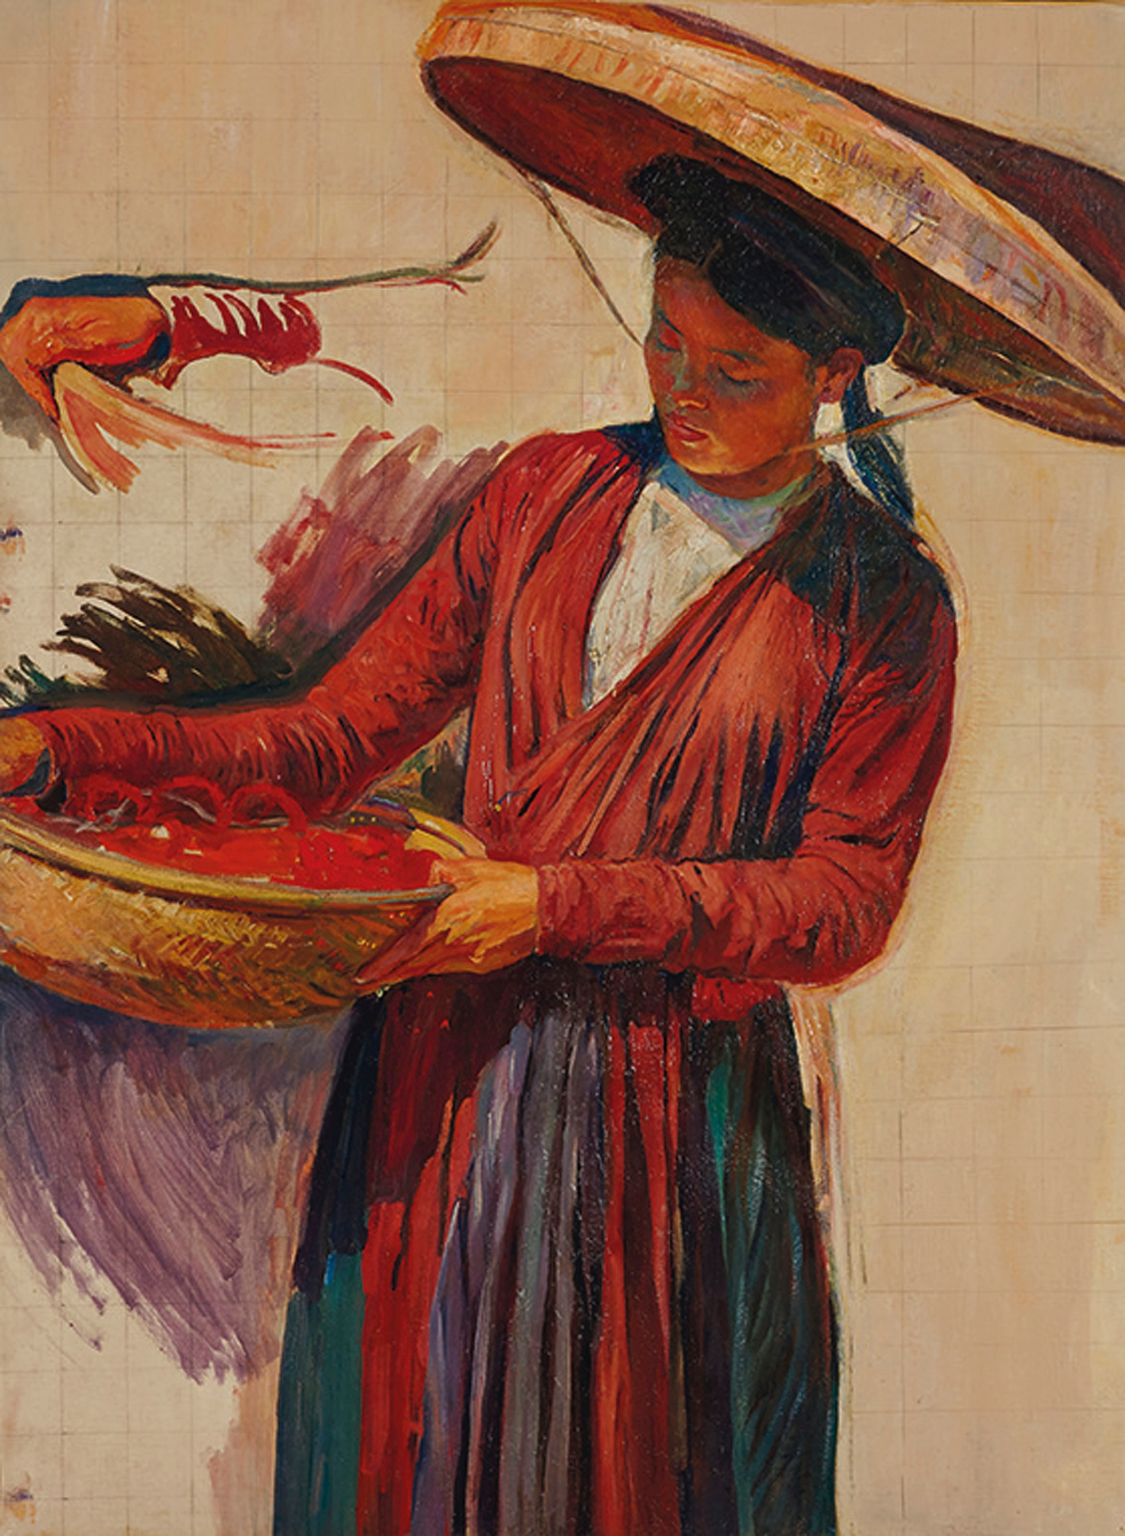 VICTOR TARDIEU
(French, 1870-1937)
La Tonkinoise Au Panier (Tonkin Woman with Basket)
oil on canvas
108 x 80 cm. (42 1/2 x 31 1/2 in.)
Painted in 1923


On the 2nd of February 1921, Victor Tardieu arrived in Hanoi probably with no idea of what lay ahead of him. As a talented painter, recently graduated from the academy Les Beaux-Arts de Paris and already known for some of his work, he received the Indochina Prize from the French government which allowed him free travel to Vietnam, and accommodation with travelling costs included in return for describing the beauty and the competence of this then-little known colony. The order of a large fresco for the University of Indochina (then under construction) marked a turning point for Tardieu personally, as well as for Vietnamese painting. To fulfill this order he had to extend his stay over the year planned as to await the end of the university's construction.

In 1921, Tardieu was not yet aware of the important role he was about to play in Vietnamese visual art of the 20th century. However on 24th October 1924 he founded the art school L'Ecole des Beaux-Arts in Hanoi which would soon attract some of the most famous painters Vietnam was to know: Le Pho, Mai Thu, Vu Cao Dam as well as Nguyen Phan Chanh, Nguyen Gia Tri and To Ngoc Van, just to name a few. Through their work, they all testified to the affection and respect for Tardieu's teaching. 
Through Tardieu's humanist philosophy, the large fresco for the University of Indochina magnified the French effort in Vietnam, depicting an almost idyllic relationship based on mutual respect. To achieve this (Fig 1.), Tardieu painted numerous characters meant to represent the strength of both civilizations. Tardieu advocated collaboration over confrontation and through evoking the rurality of Vietnam in his works, also conjured the essence of its culture, land and the peasants who incarnate it. Our lady peasant, "La
Tonkinoise" wears her traditional hat and keeps her grace despite the harshness of the task. Her left hand, at the same time beautiful and firm, shows and symbolizes the Vietnamese women's strength as we know it since the sisters Trung. This lady, coming to sell her products to the market shows femininity and unceasing elegance.

Tardieu worked on this large fresco in three stages. First, he drew many charcoal sketches on paper to describe with precision the themes chosen and to imagine them in the final fresco. After which he painted the different themes with oils on canvas matching the final scale. Finally, Tardieu painted the scene on to the foundation of the large fresco in the University.

This present painting is the first version on canvas. It conveys the energy and freshness of a new painting and Tardieu's talent is expressed with panache and class. Exoticism is minimized here. On the contrary, he kept
close to the everyday reality (hat, clothes, basket) of Vietnamese women. He painted to describe and relate, and not to fantasize, unlike other Orientalists.

La Tonkinoise is a Tardieu's masterpiece. It shows the depth and the quality of the subject and the quality of the painter's technique (see the grid for example). This ideal and this technique together are the cornerstones of Tardieu's success in Vietnam.